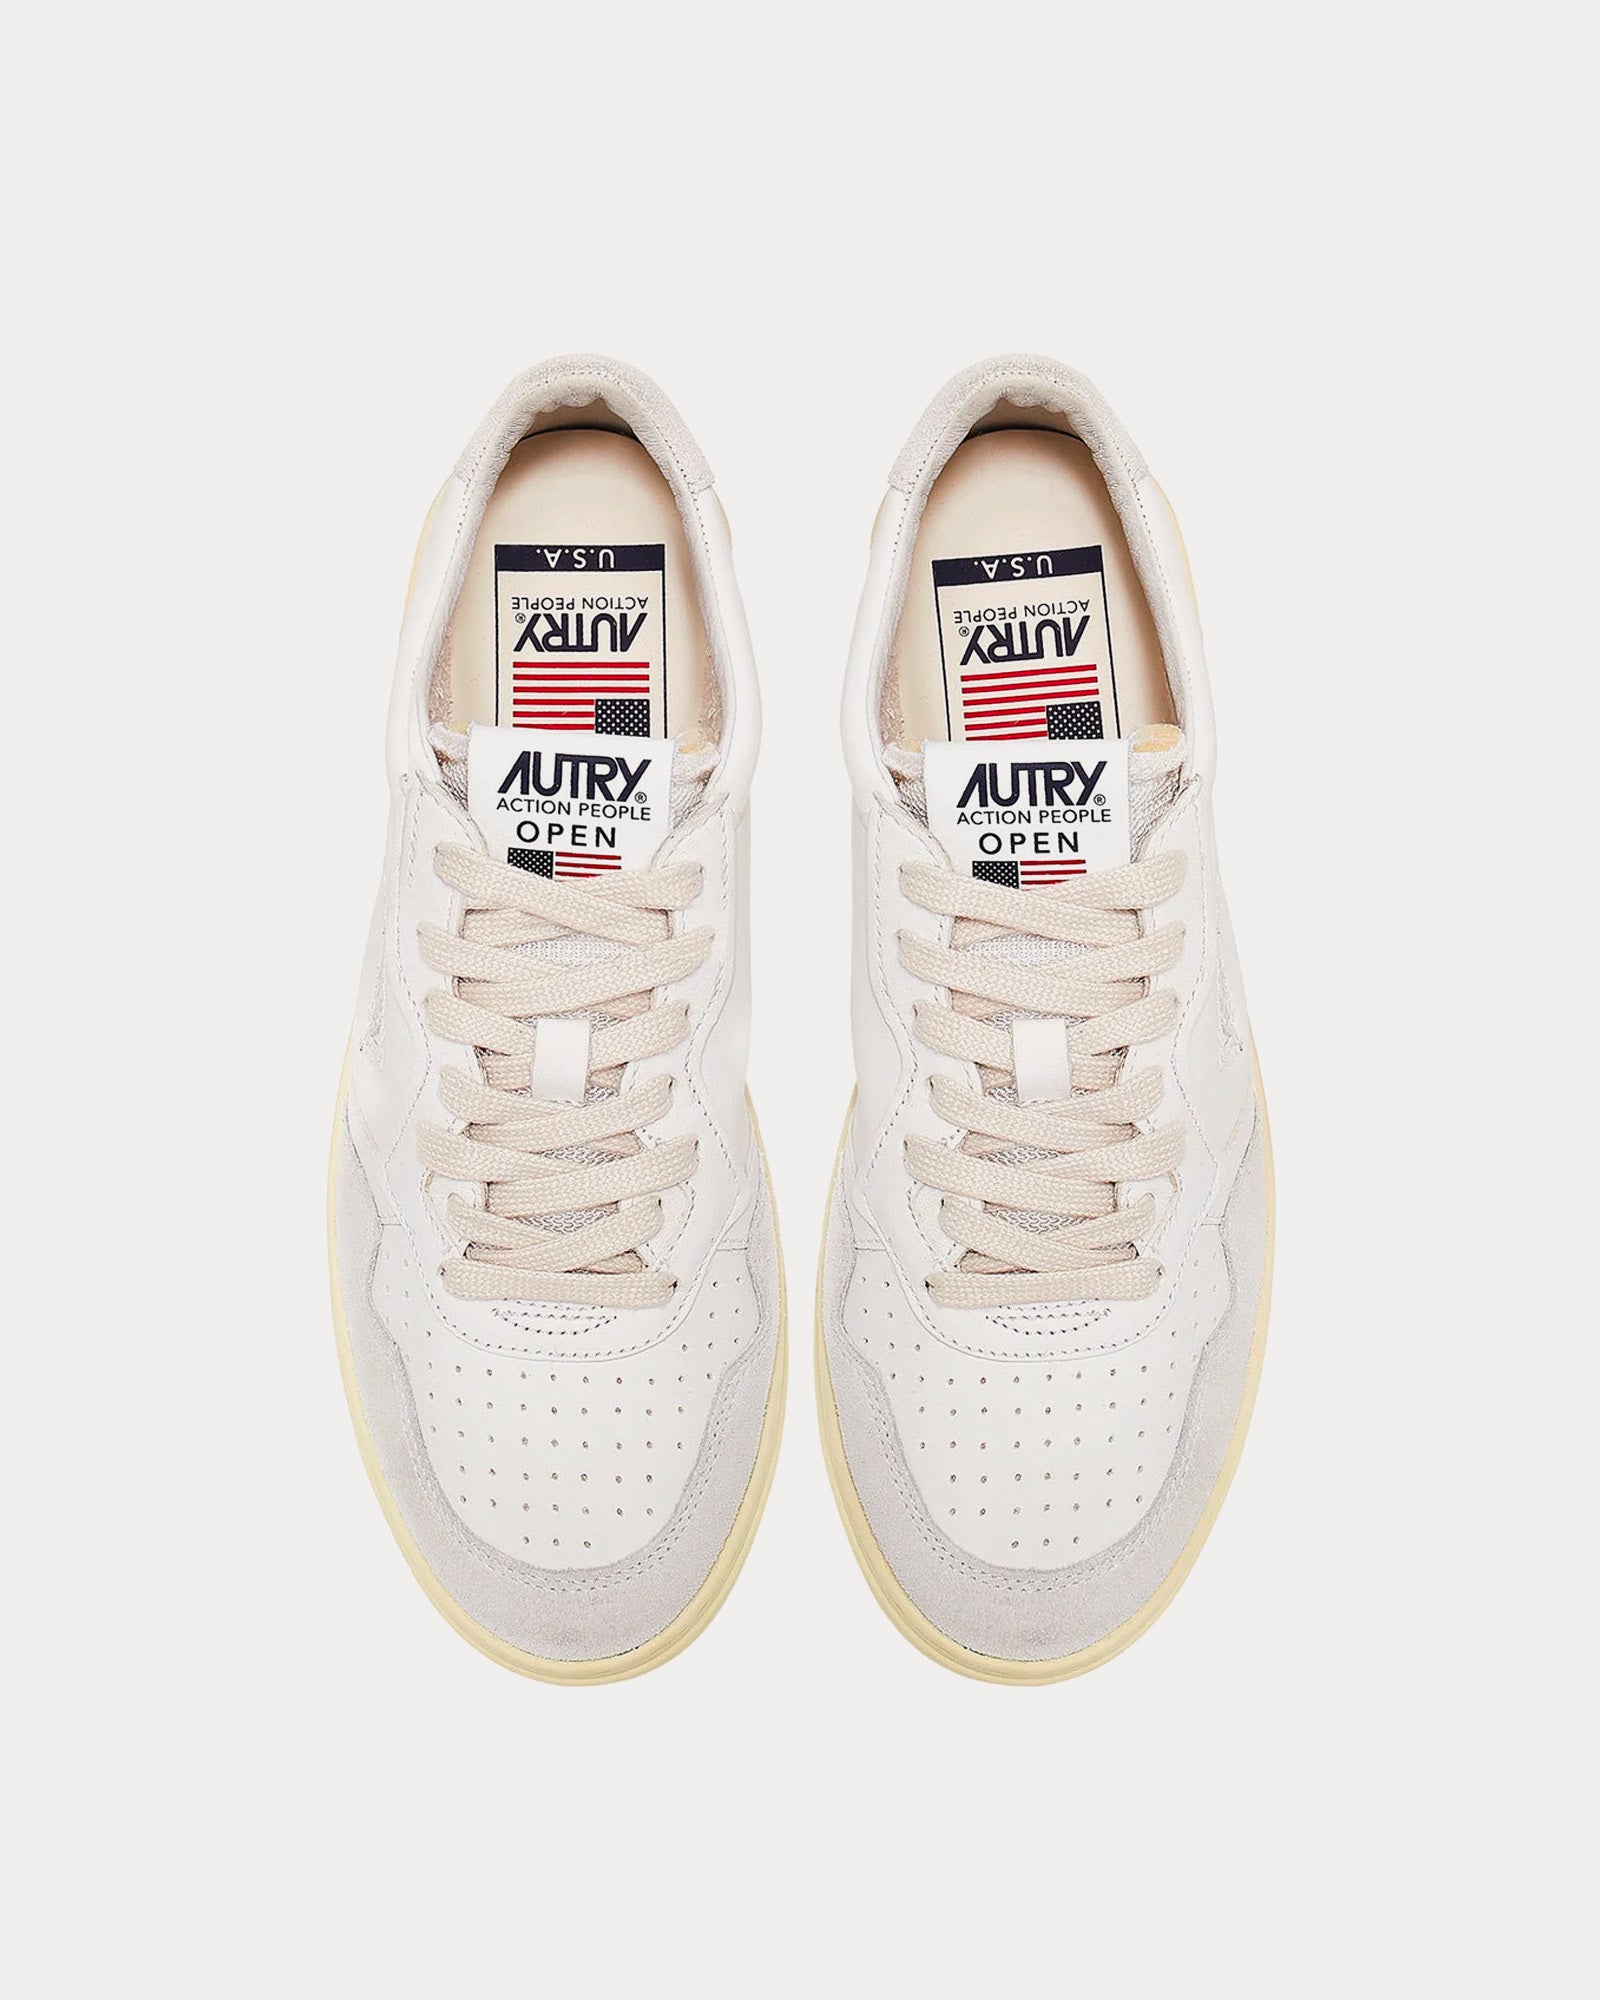 Autry - Open Leather & Suede White Low Top Sneakers